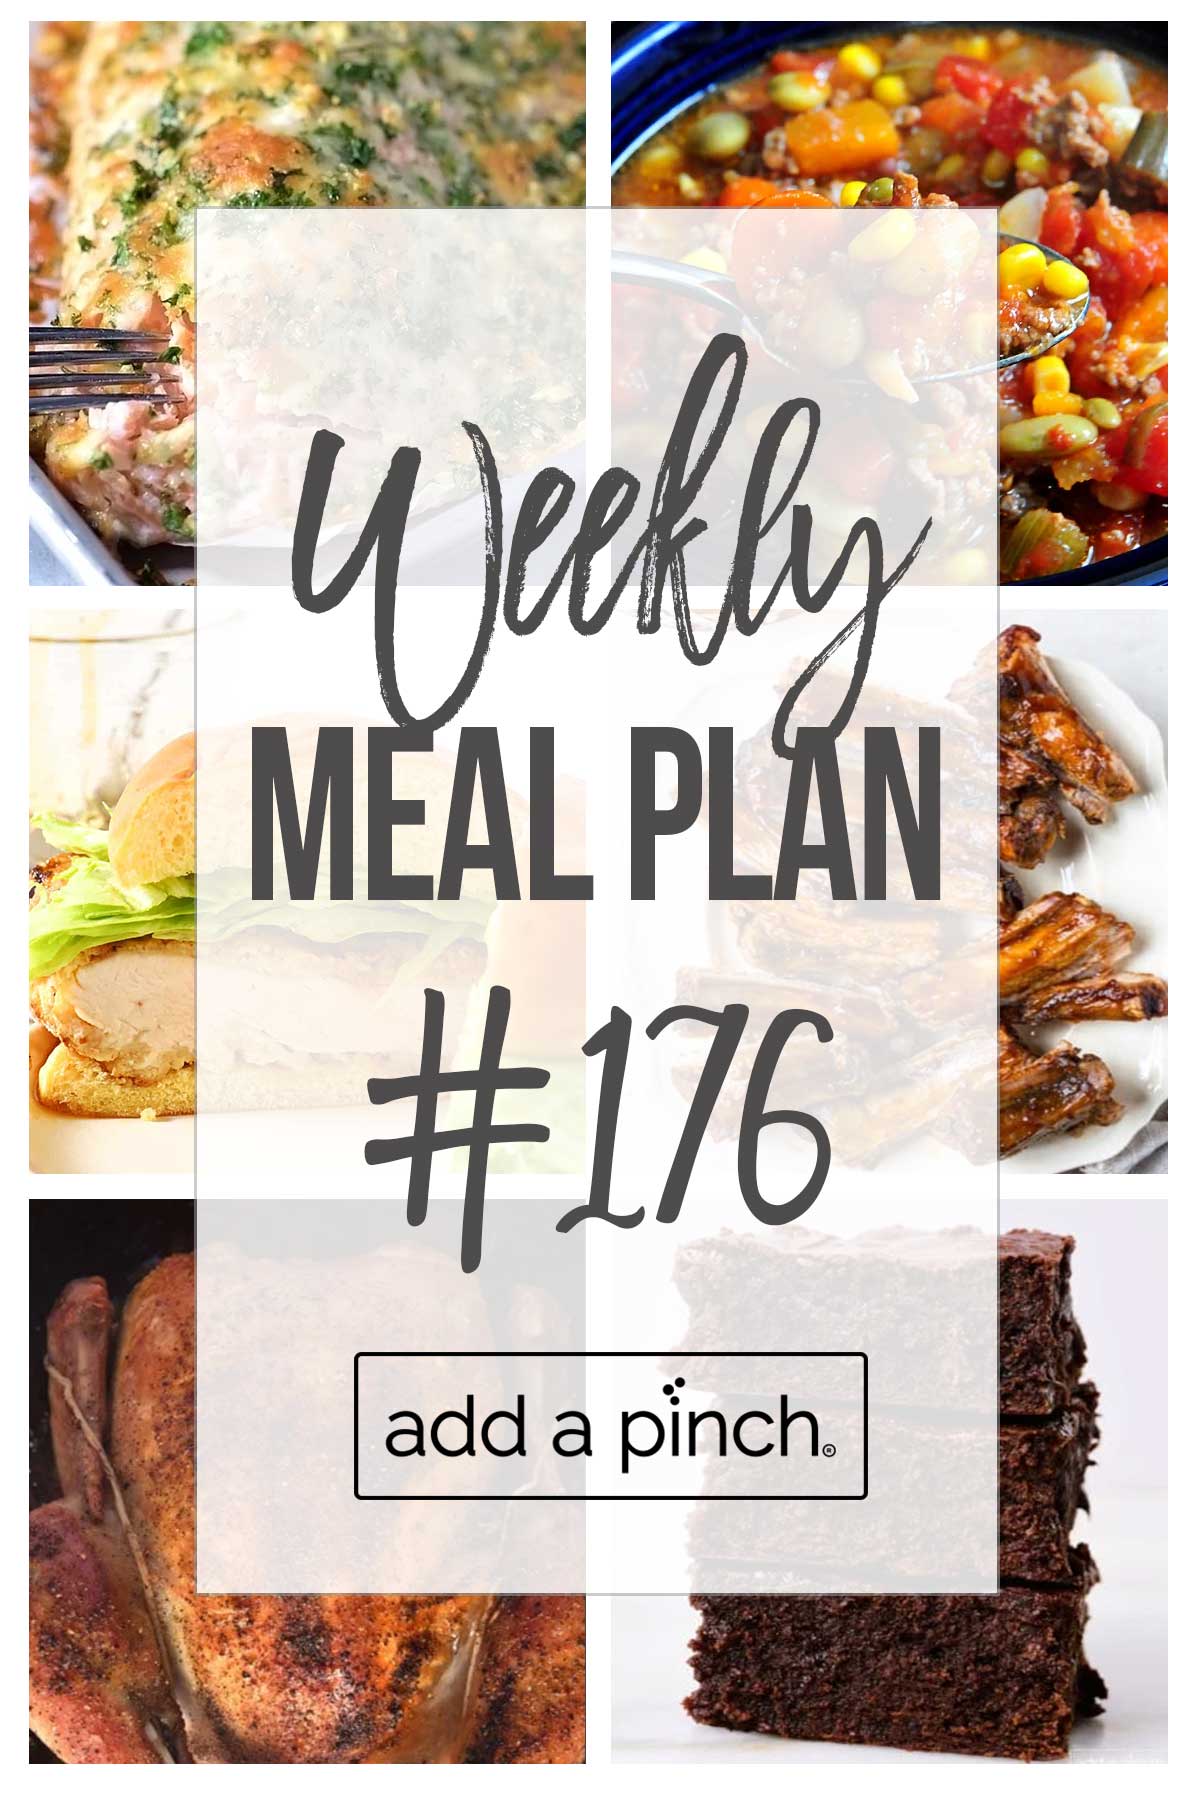 Collage of recipe images for weekly meal plan #176 with graphic text overlay saying, "weekly meal plan #176".